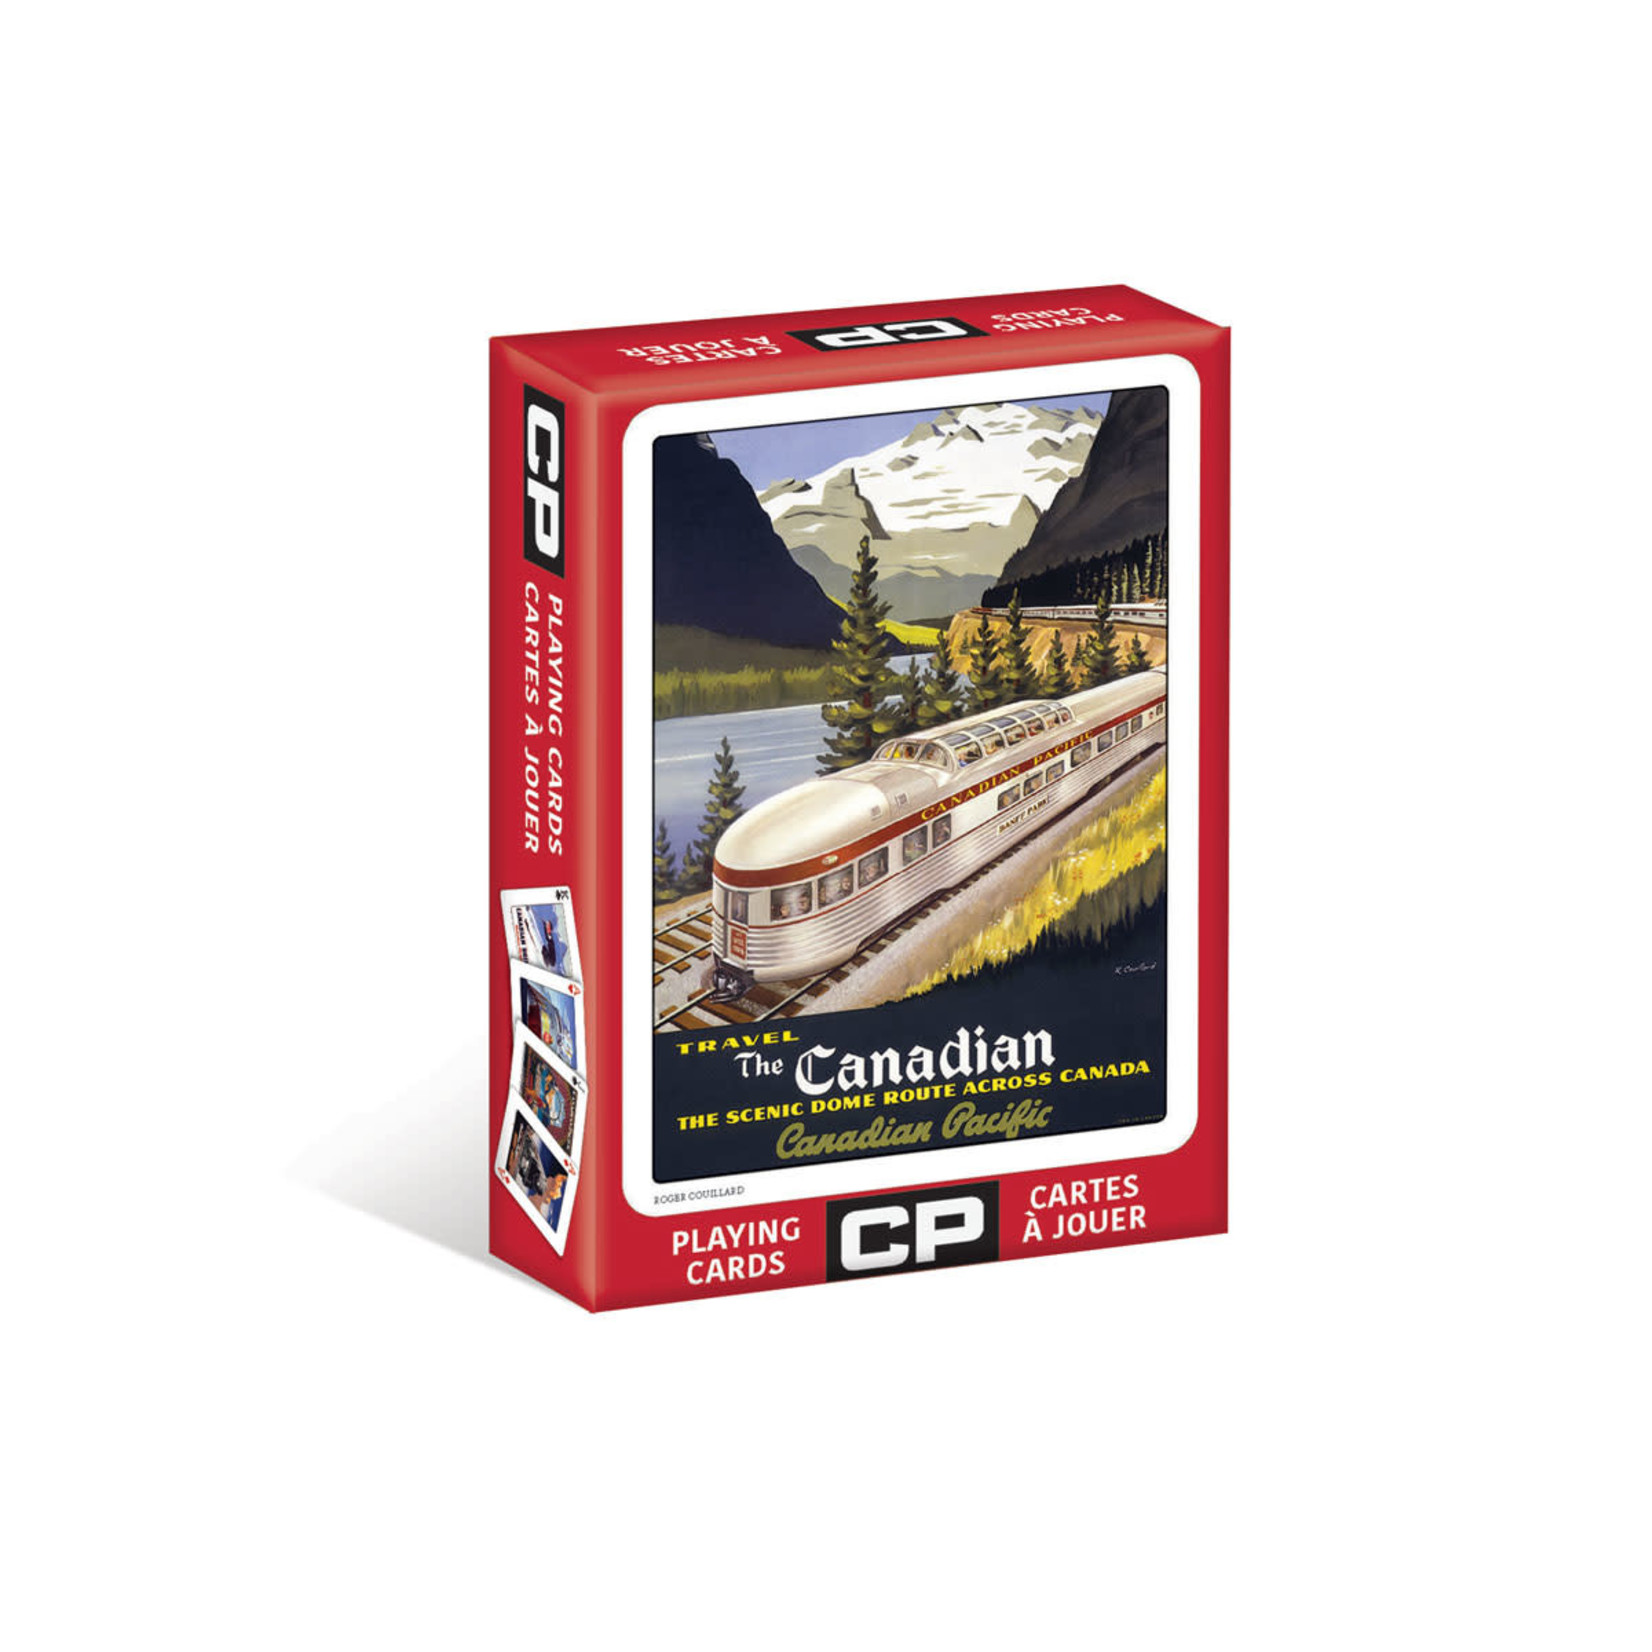 Playing Cards - Travel the Canadian Pacific